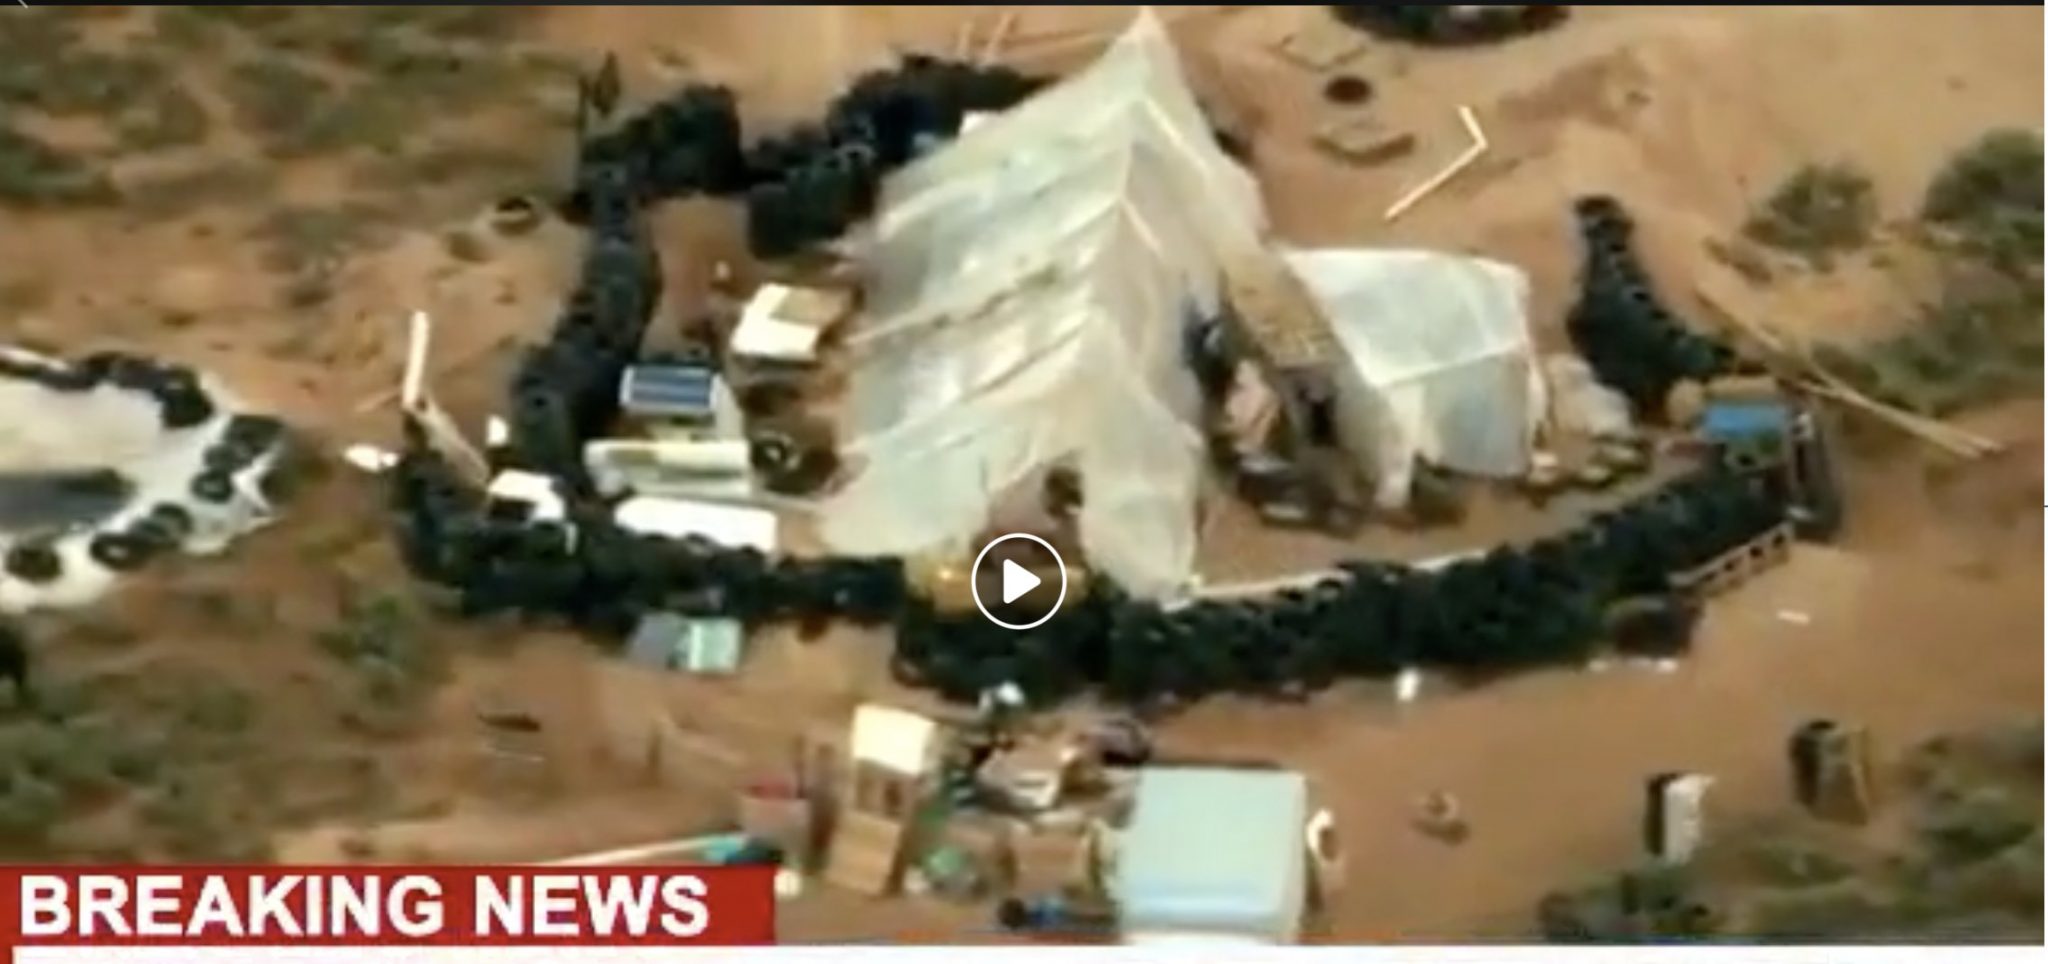 CHILD RAPE CAMP DISCOVERED IN NEW MEXICO – 11 NAKED CHILDREN RESCUED – 1 CHILD DEAD – 5 PEOPLE ARRESTED